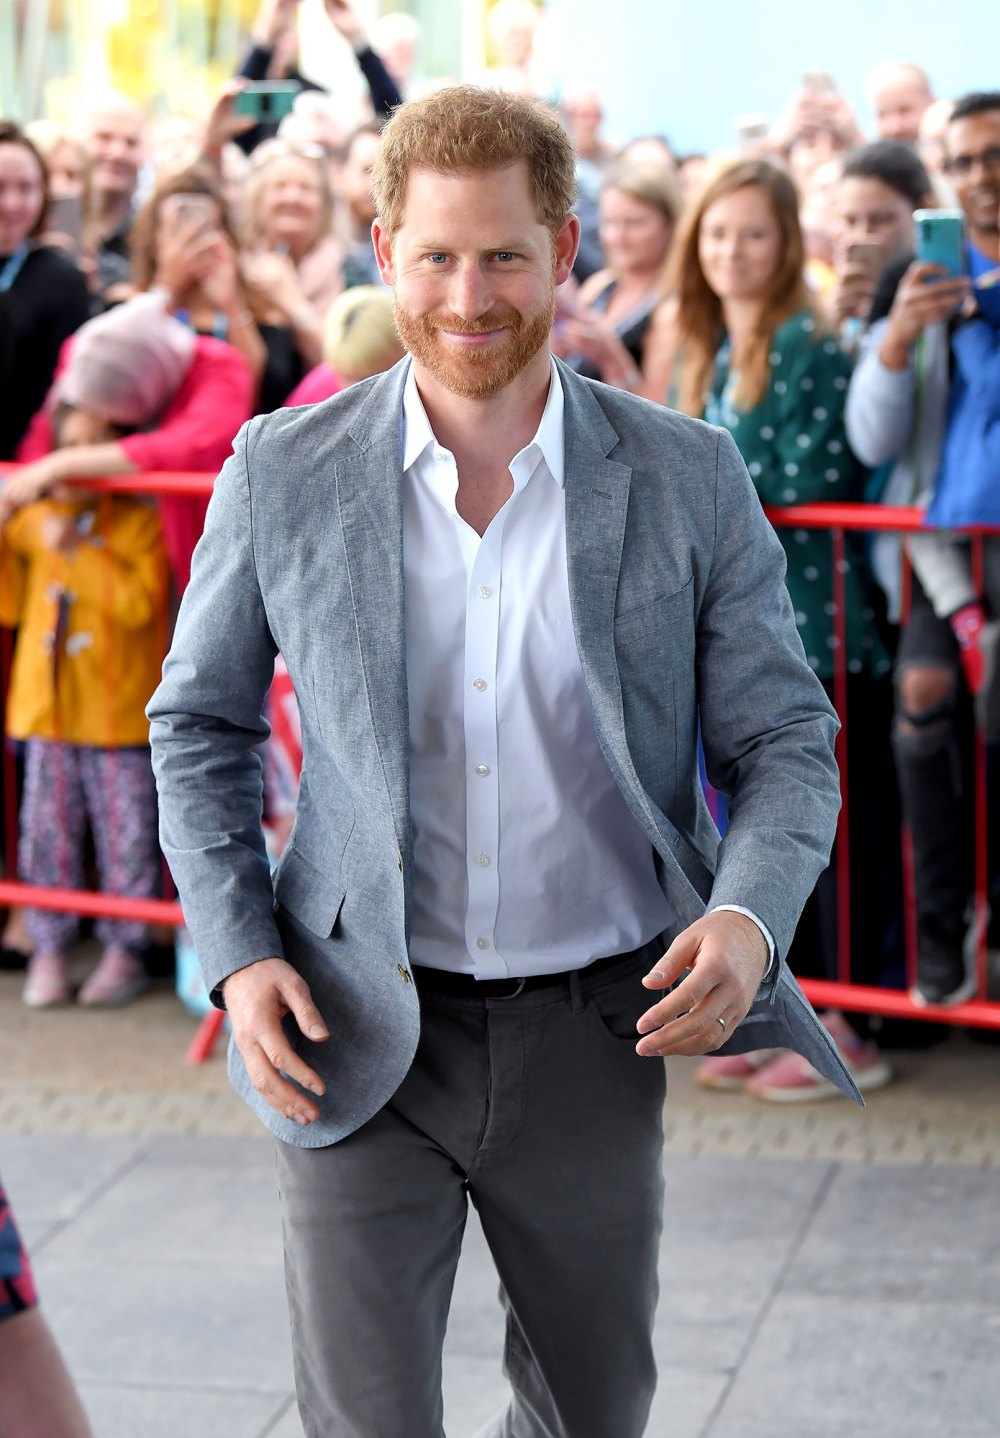 Prince Harry Is Set to Travel to Florida for Charity Event